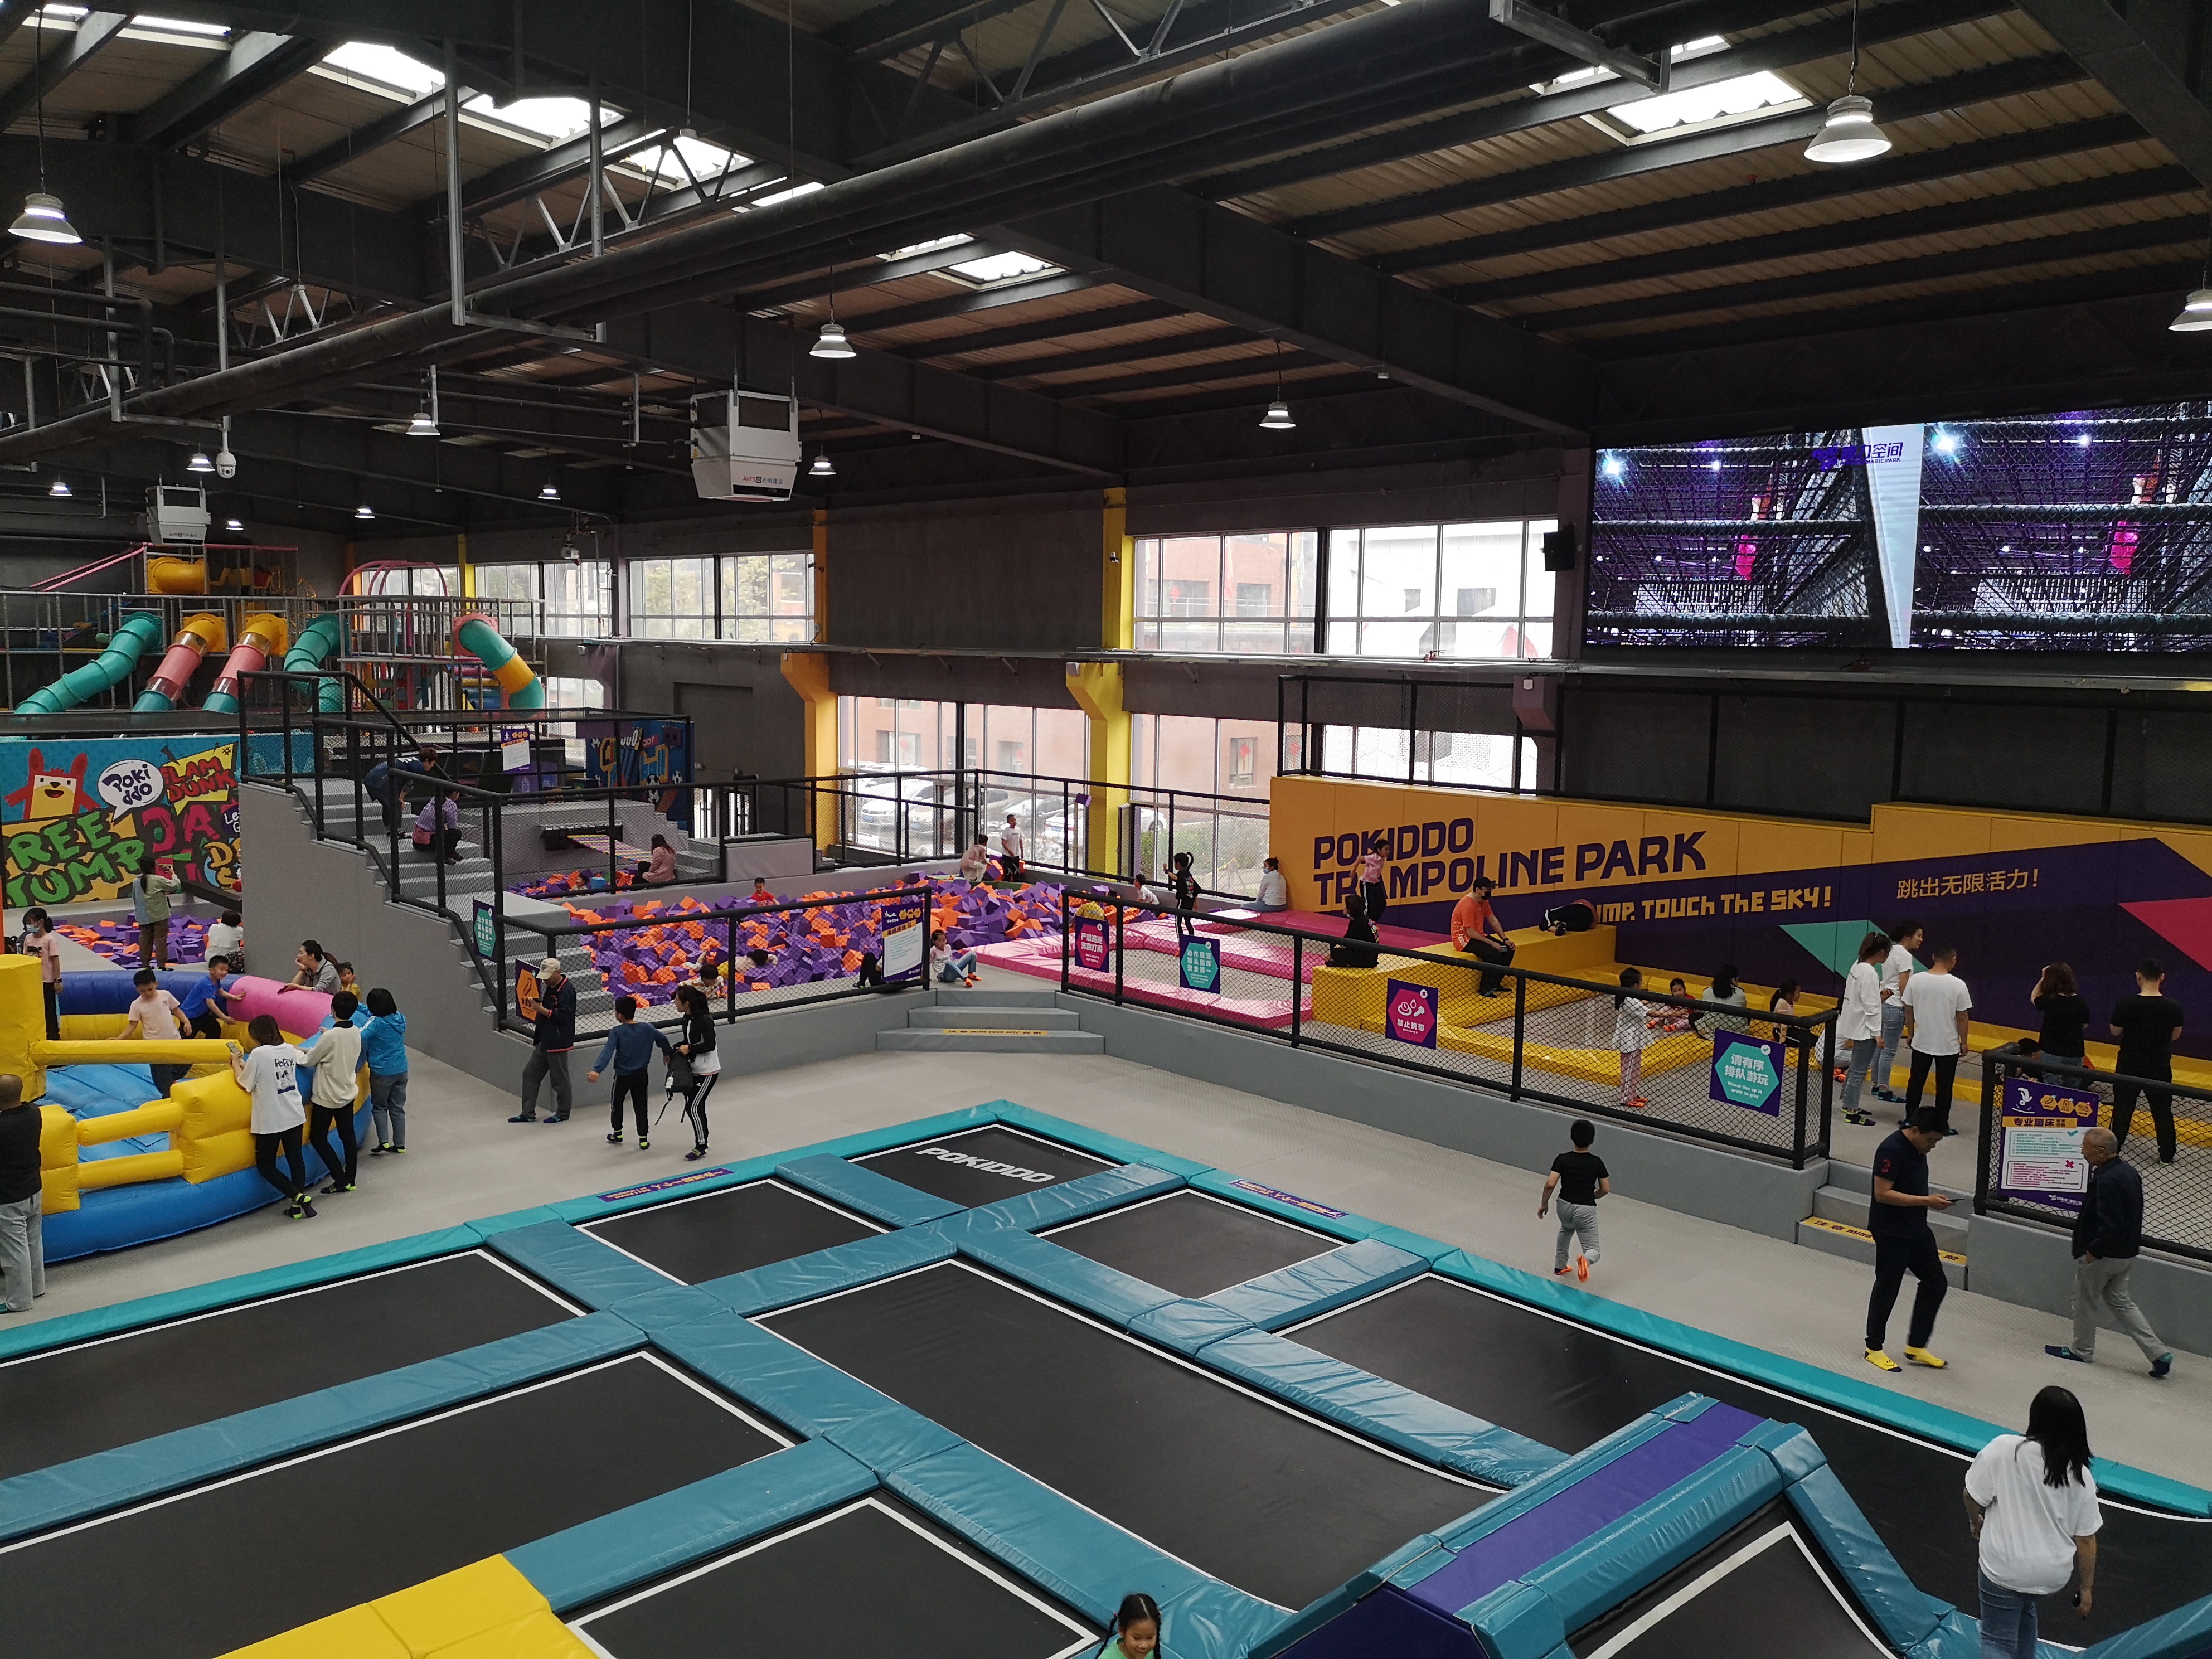 How to Develop a Plan to Attract Potential Customers to Your Trampoline Park